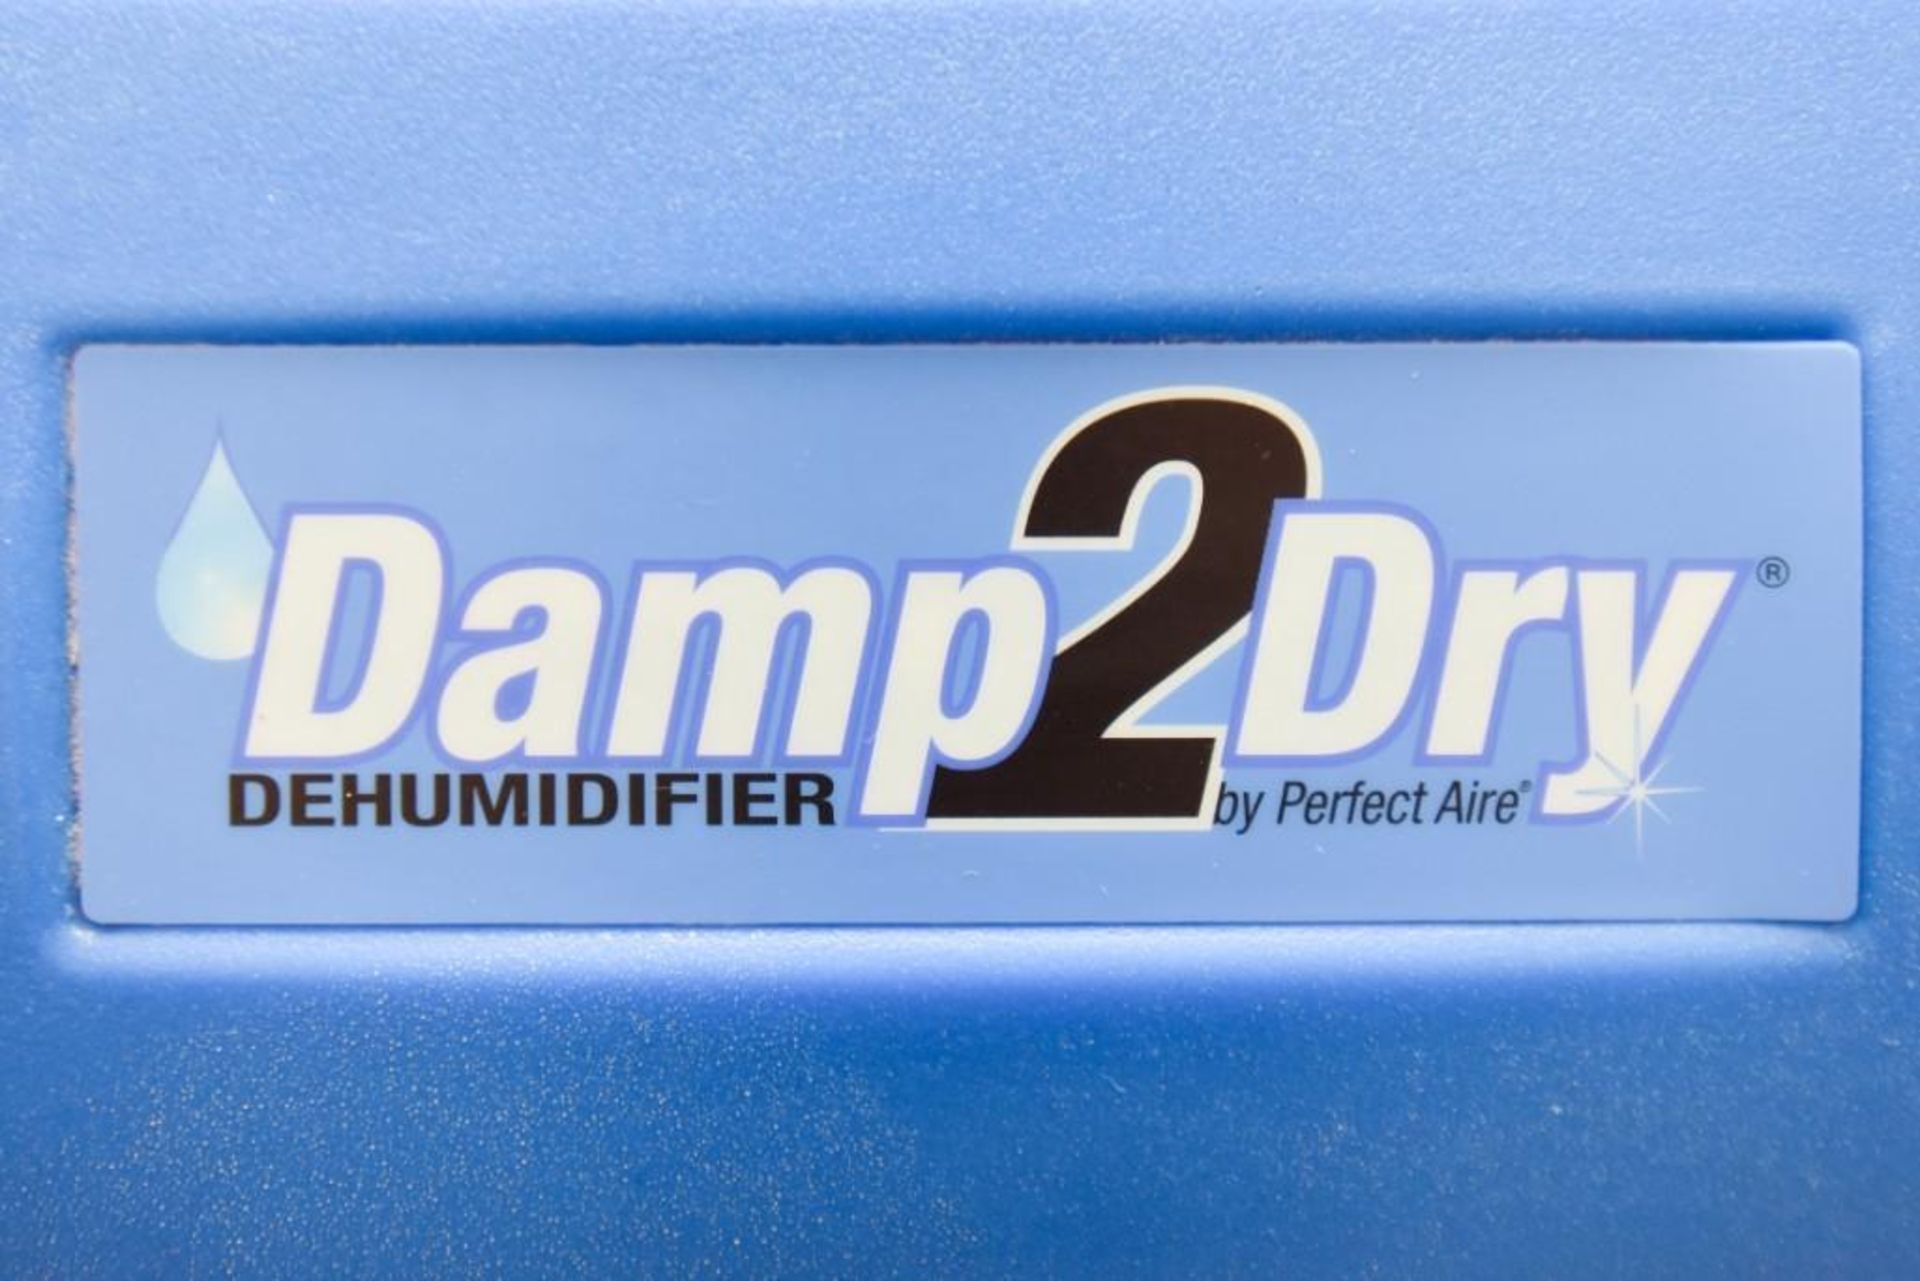 Damp 2 Dry Dehumidifier by Perfect Aire - Image 2 of 5